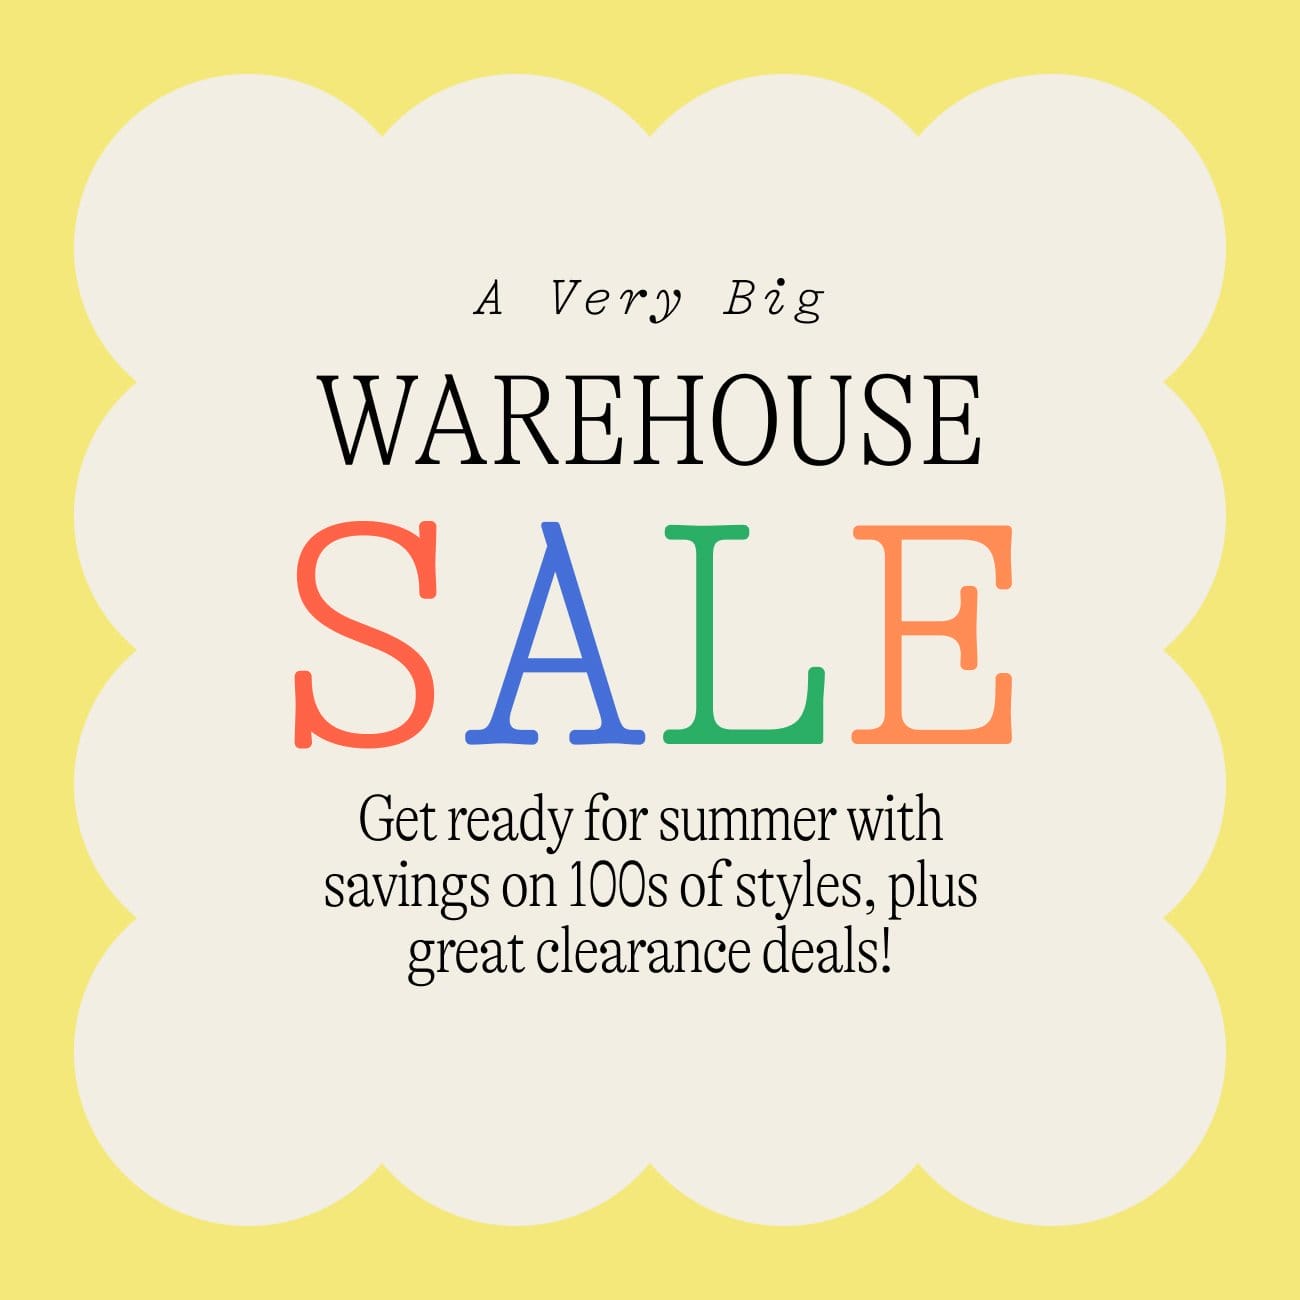 A very big WAREHOUSE sale. Get ready for summer with savings on 100s of styles, plus great clearance deals!